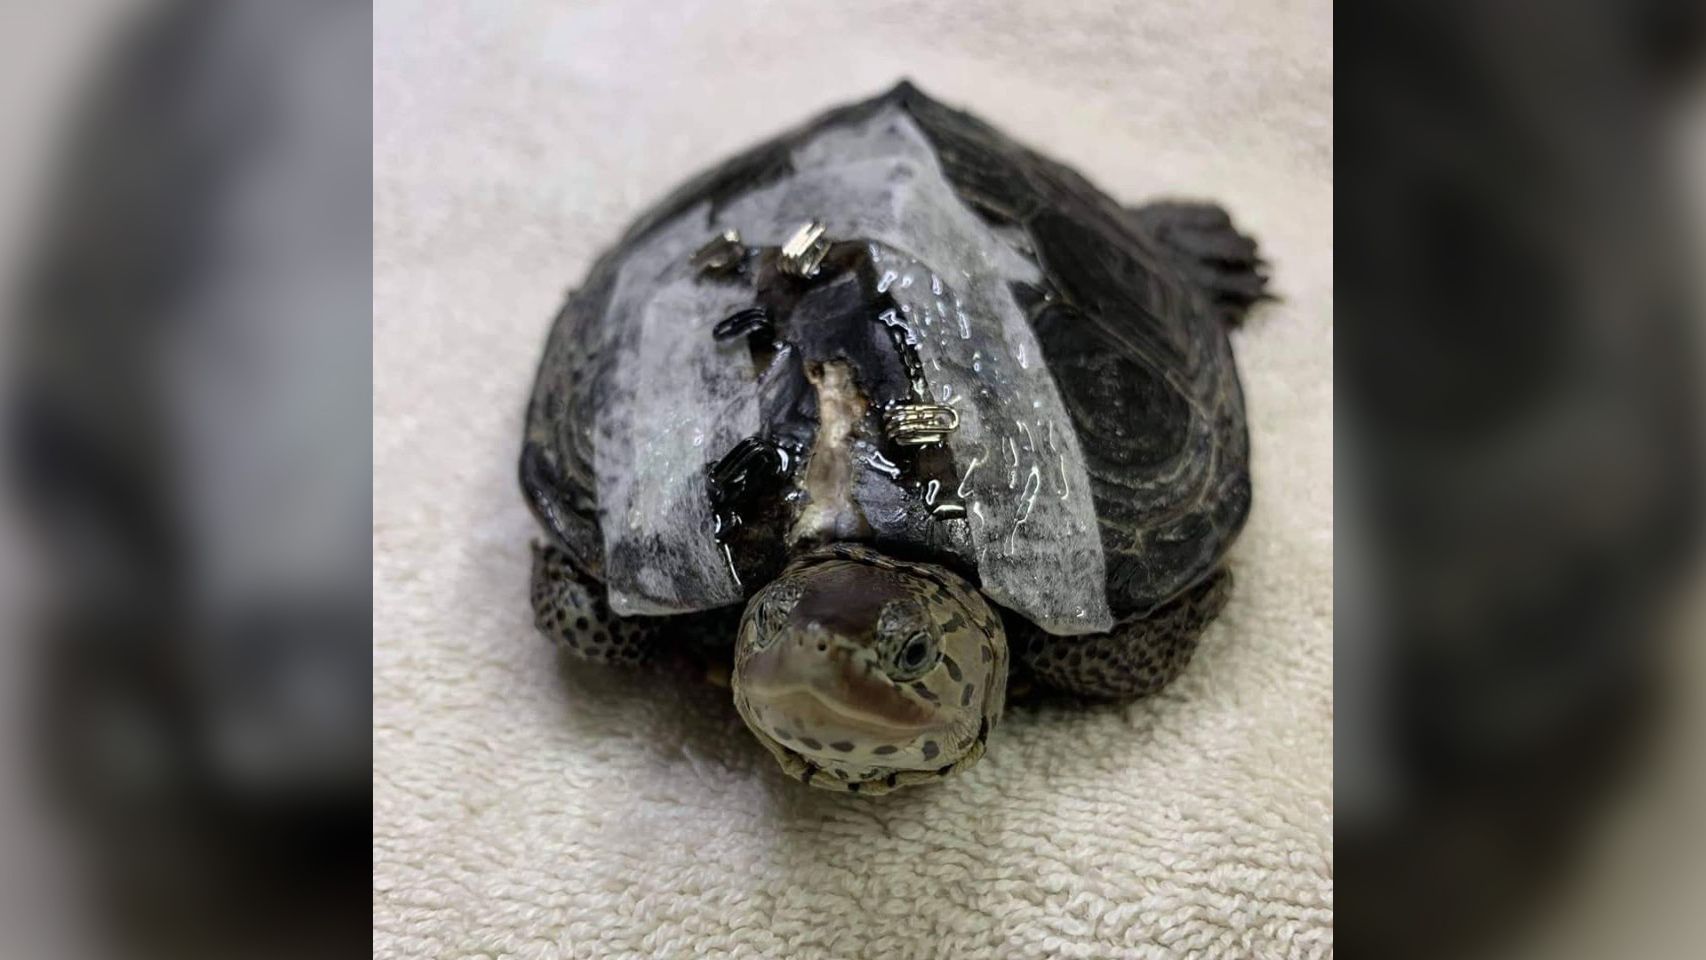 Sometimes, all it takes to save an injured turtle is a bra. No, seriously